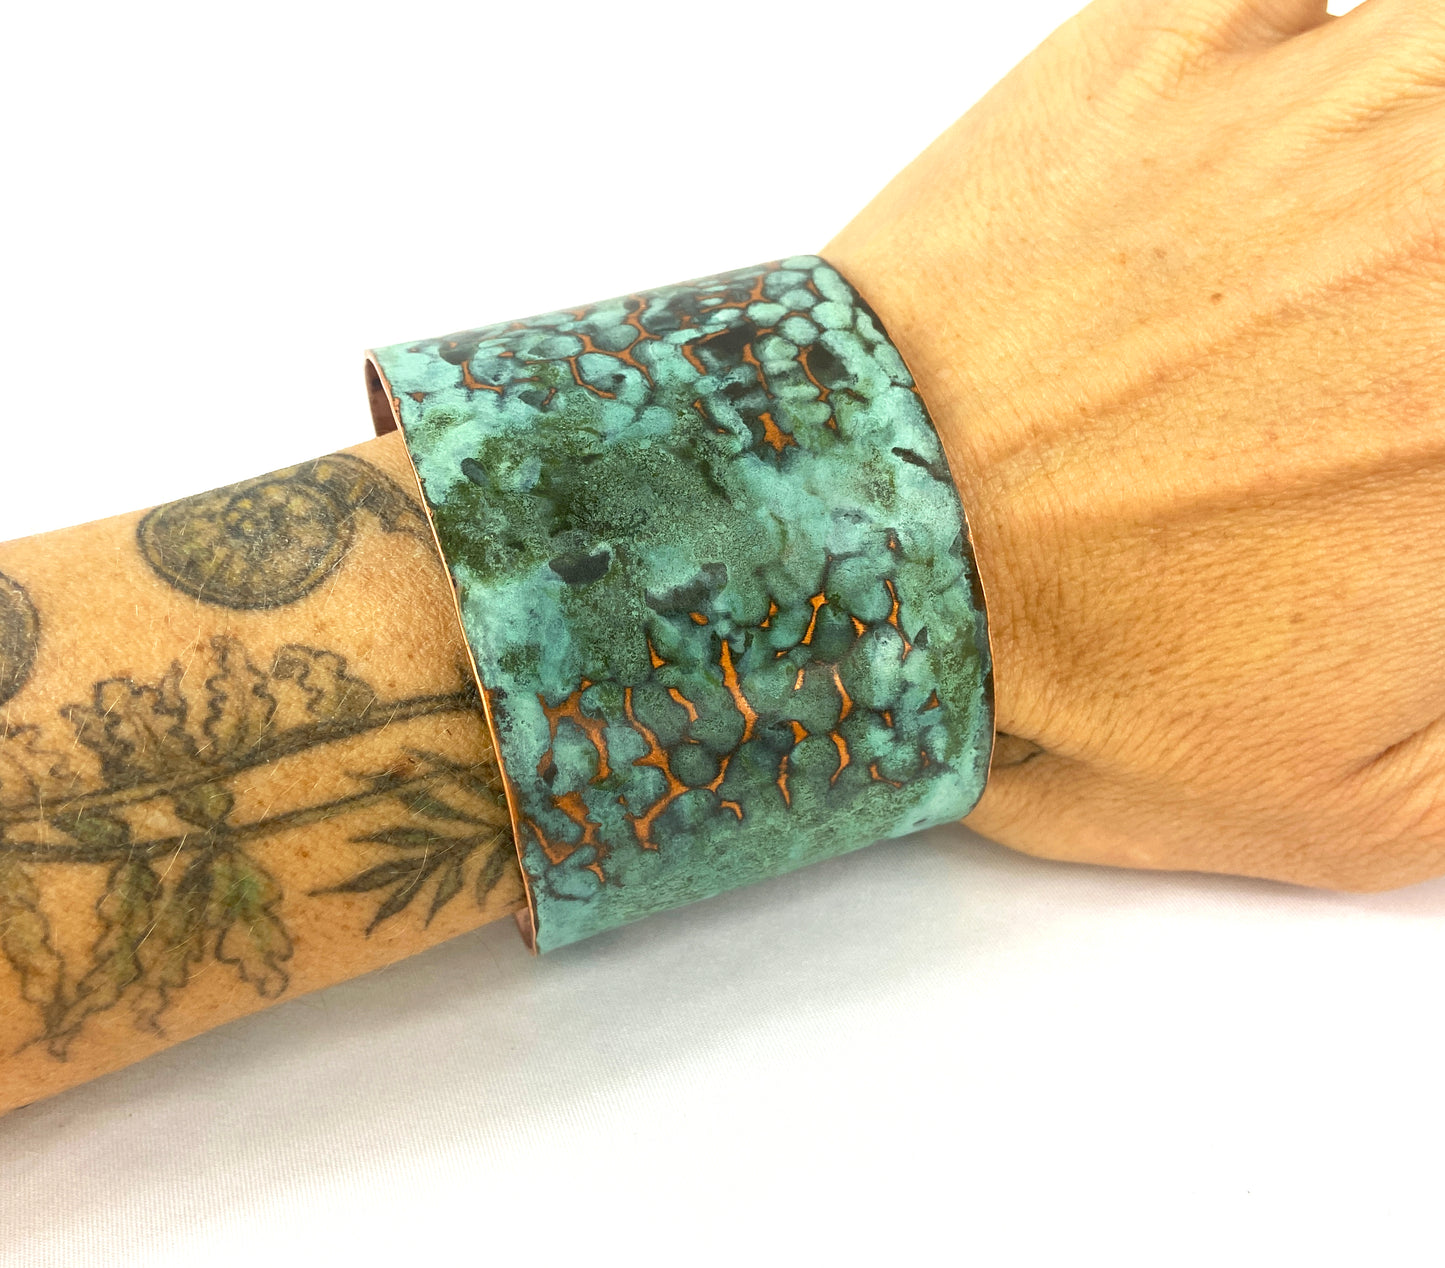 Copper "Crackle" Cuff with Tiffany Patina